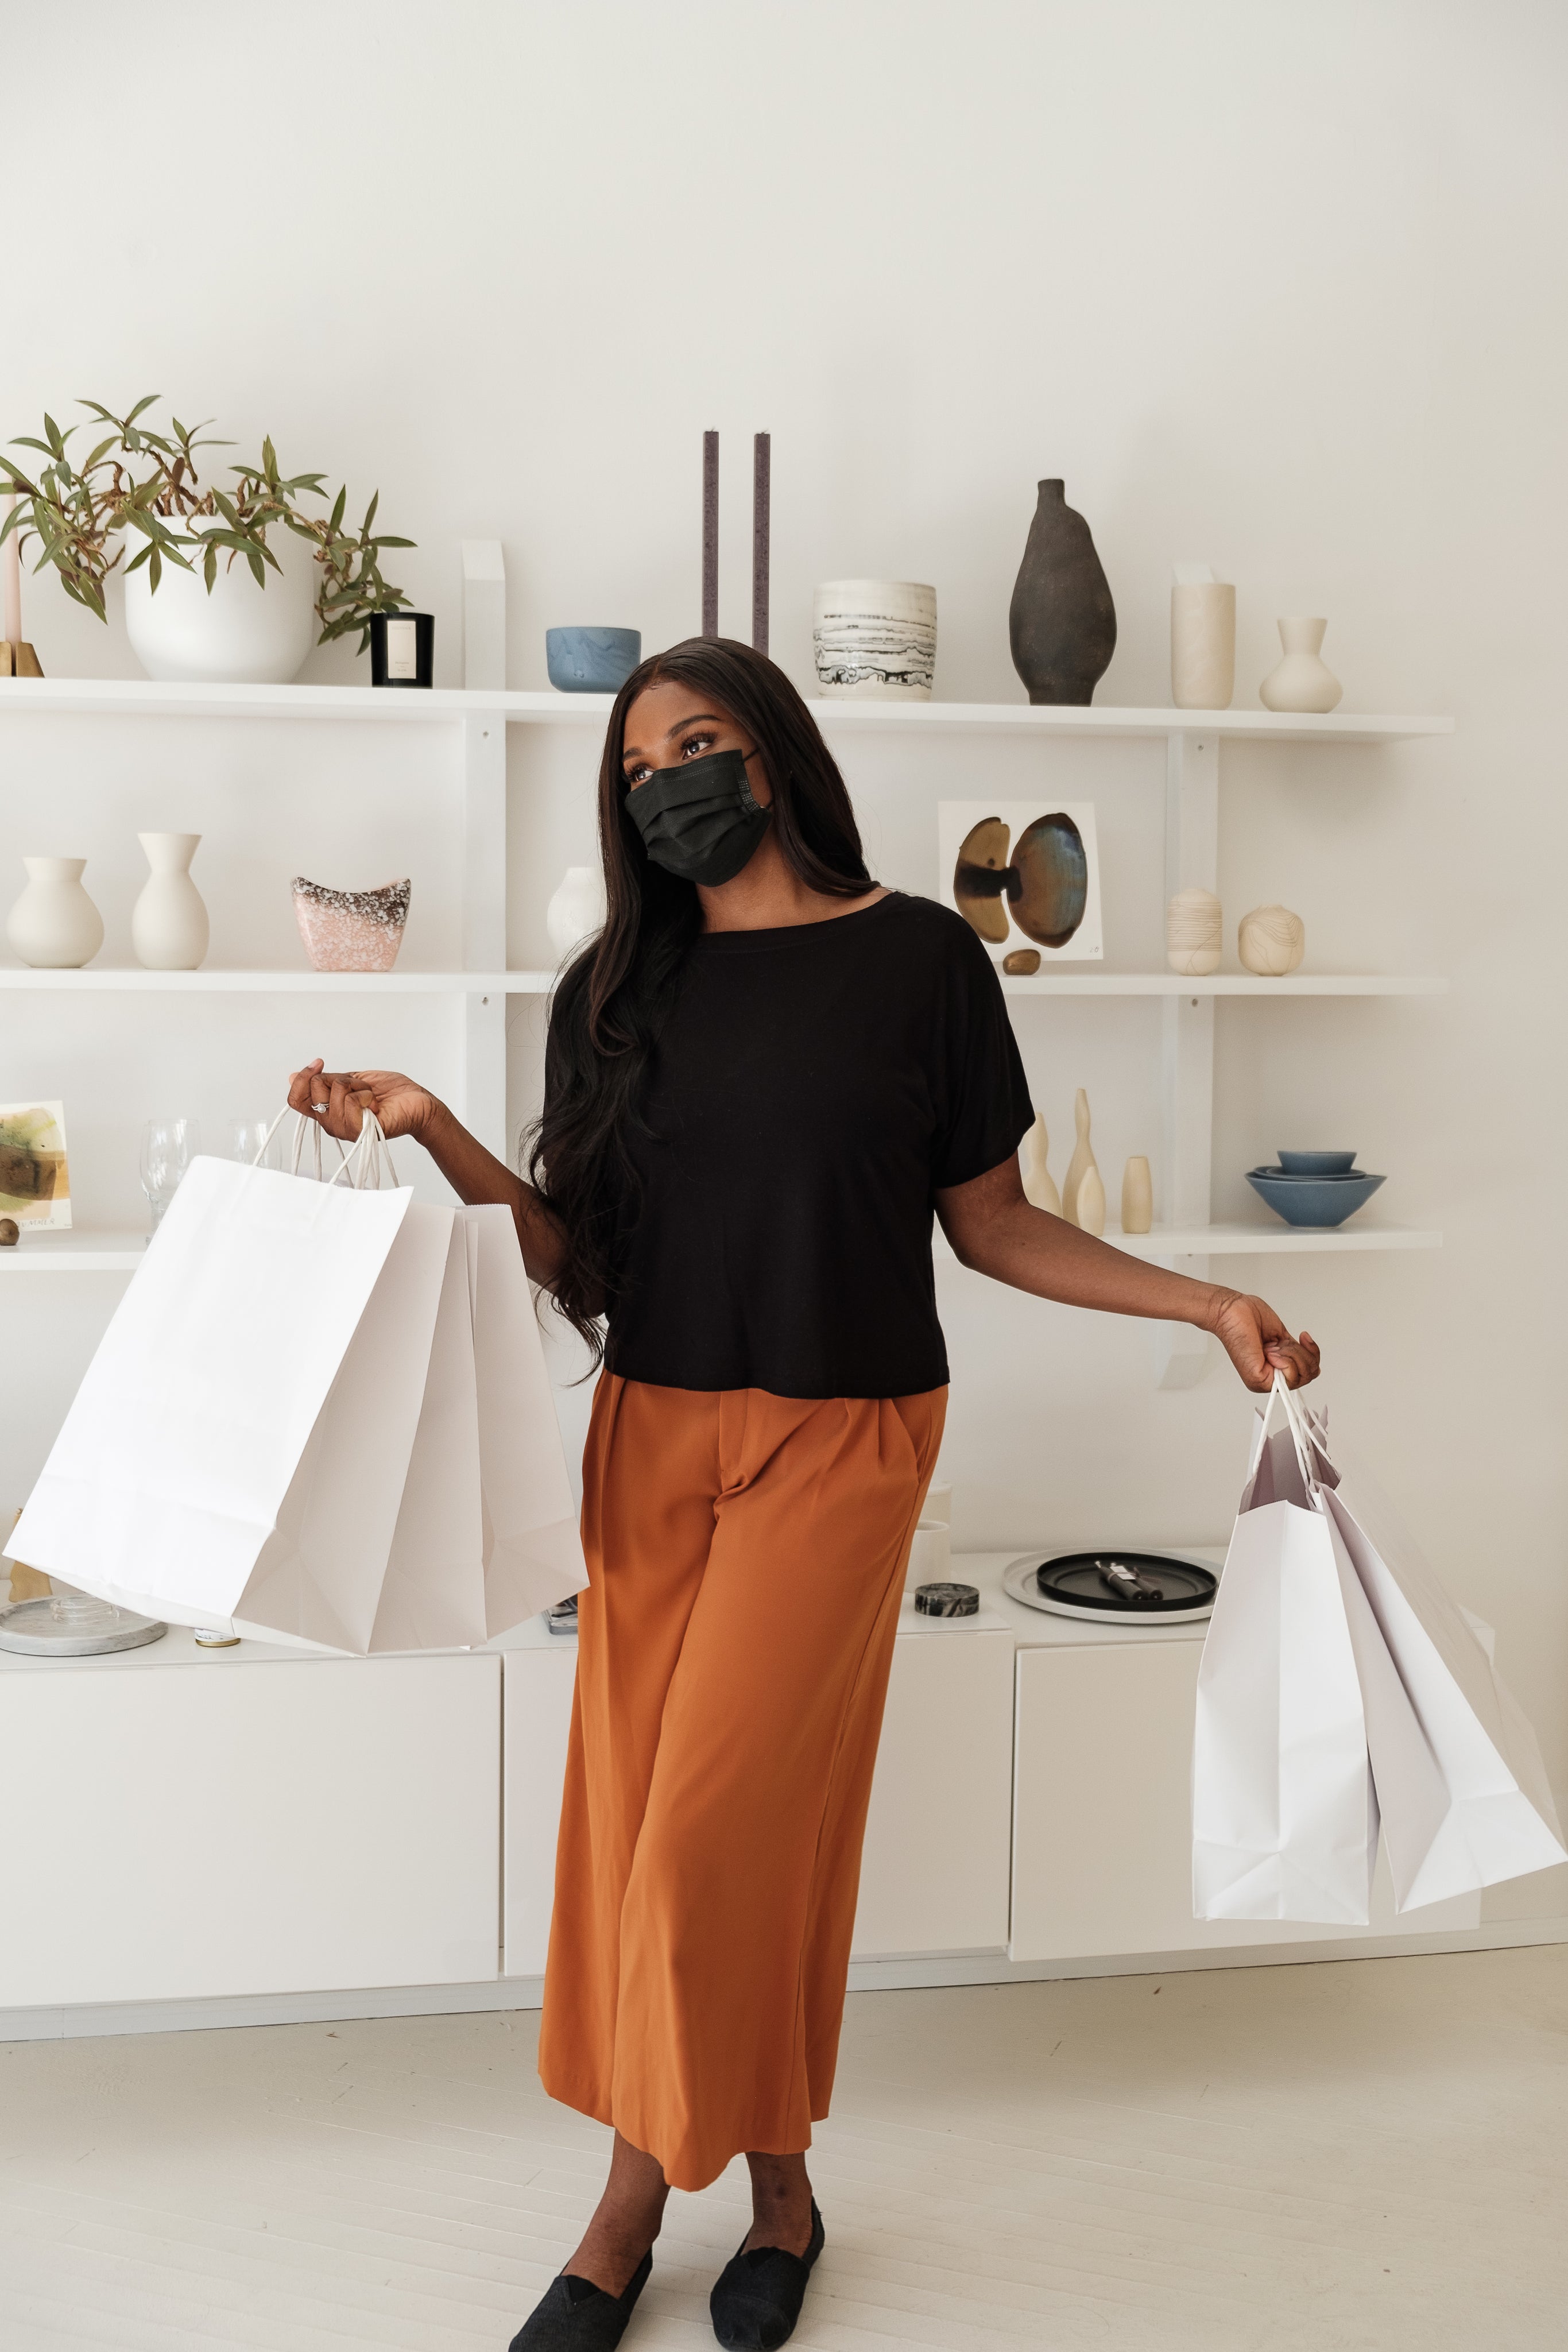 Woman with shopping bags in both hands